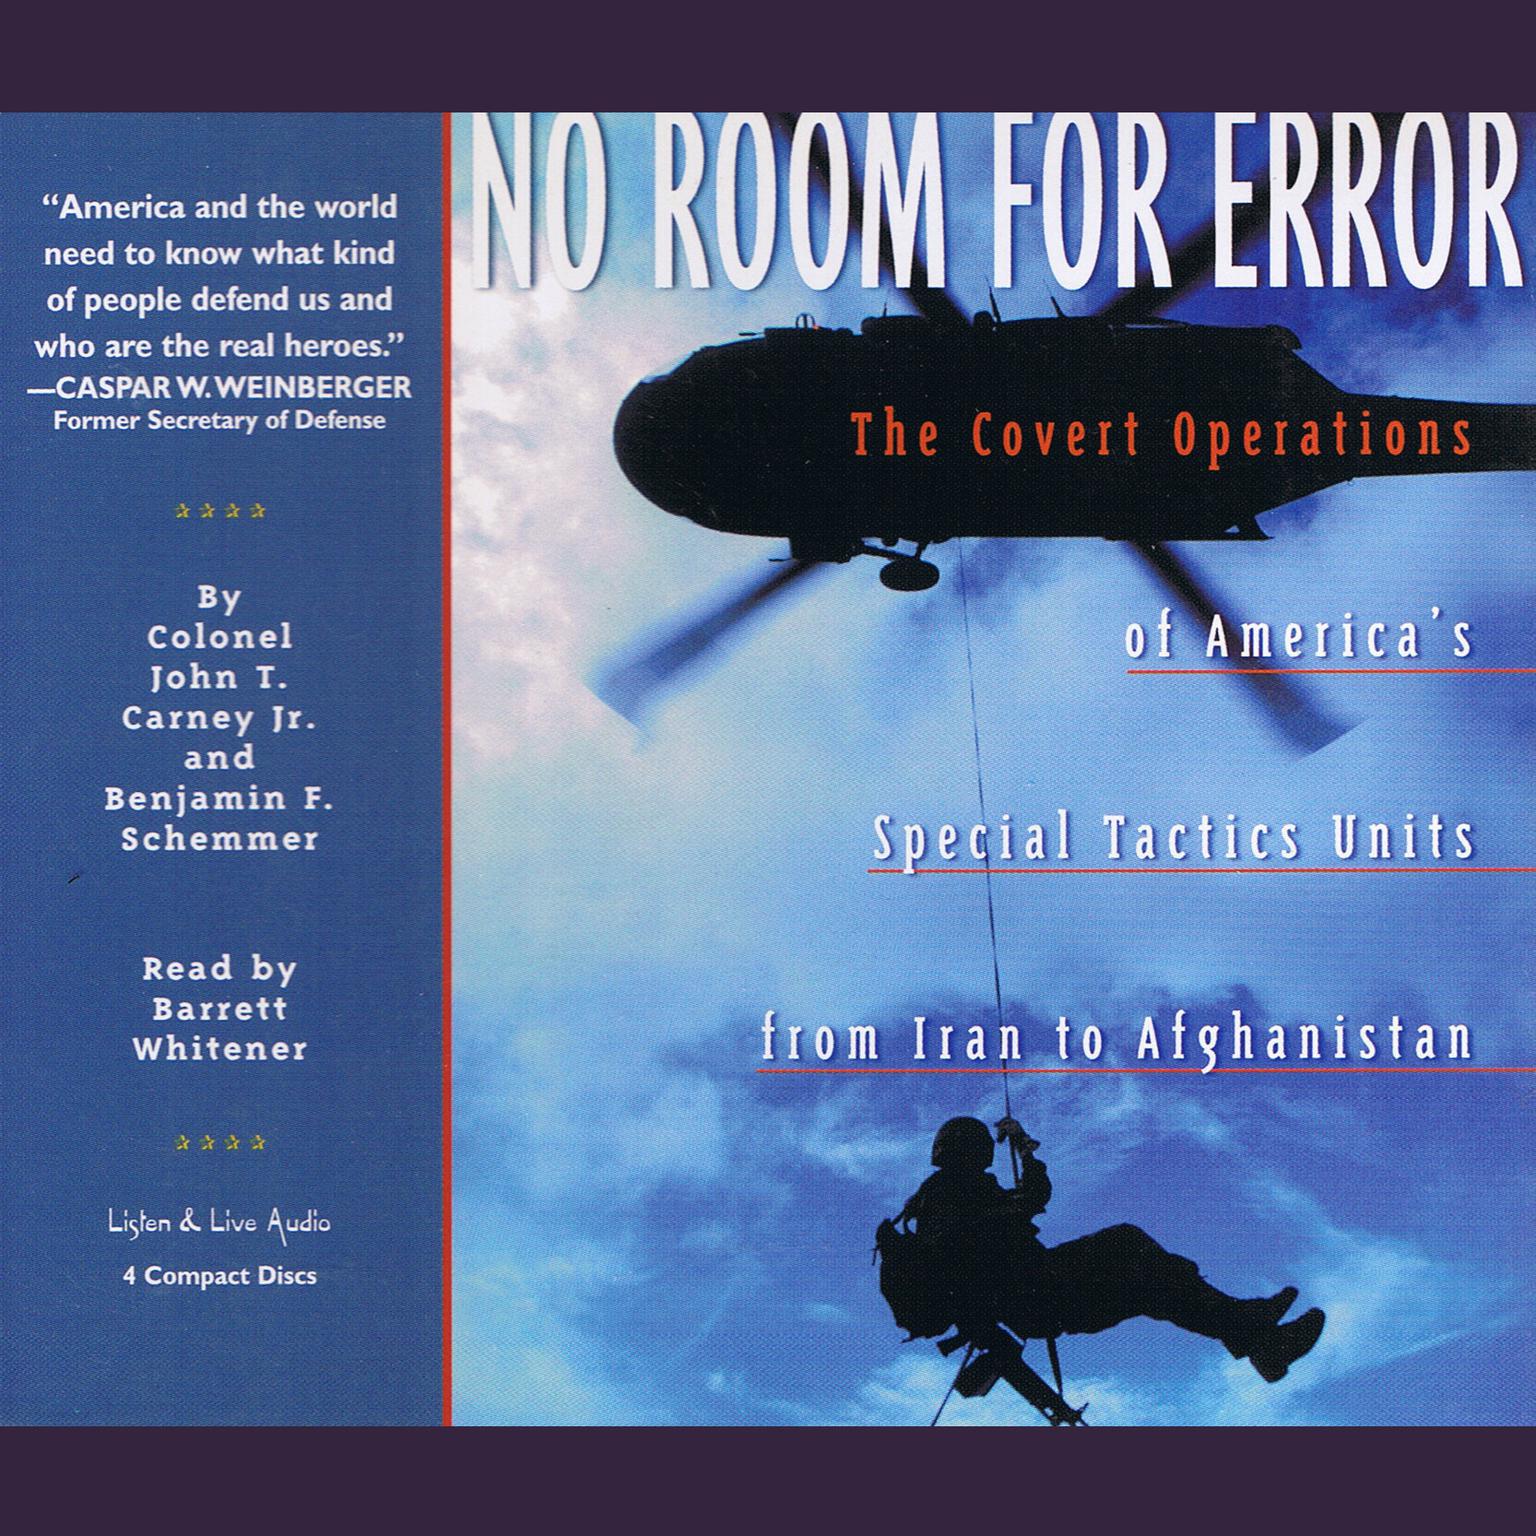 No Room For Error (Abridged): The Covert Operations of America’s Special Tactics Units from Iran to Afghanistan Audiobook, by John T. Carney